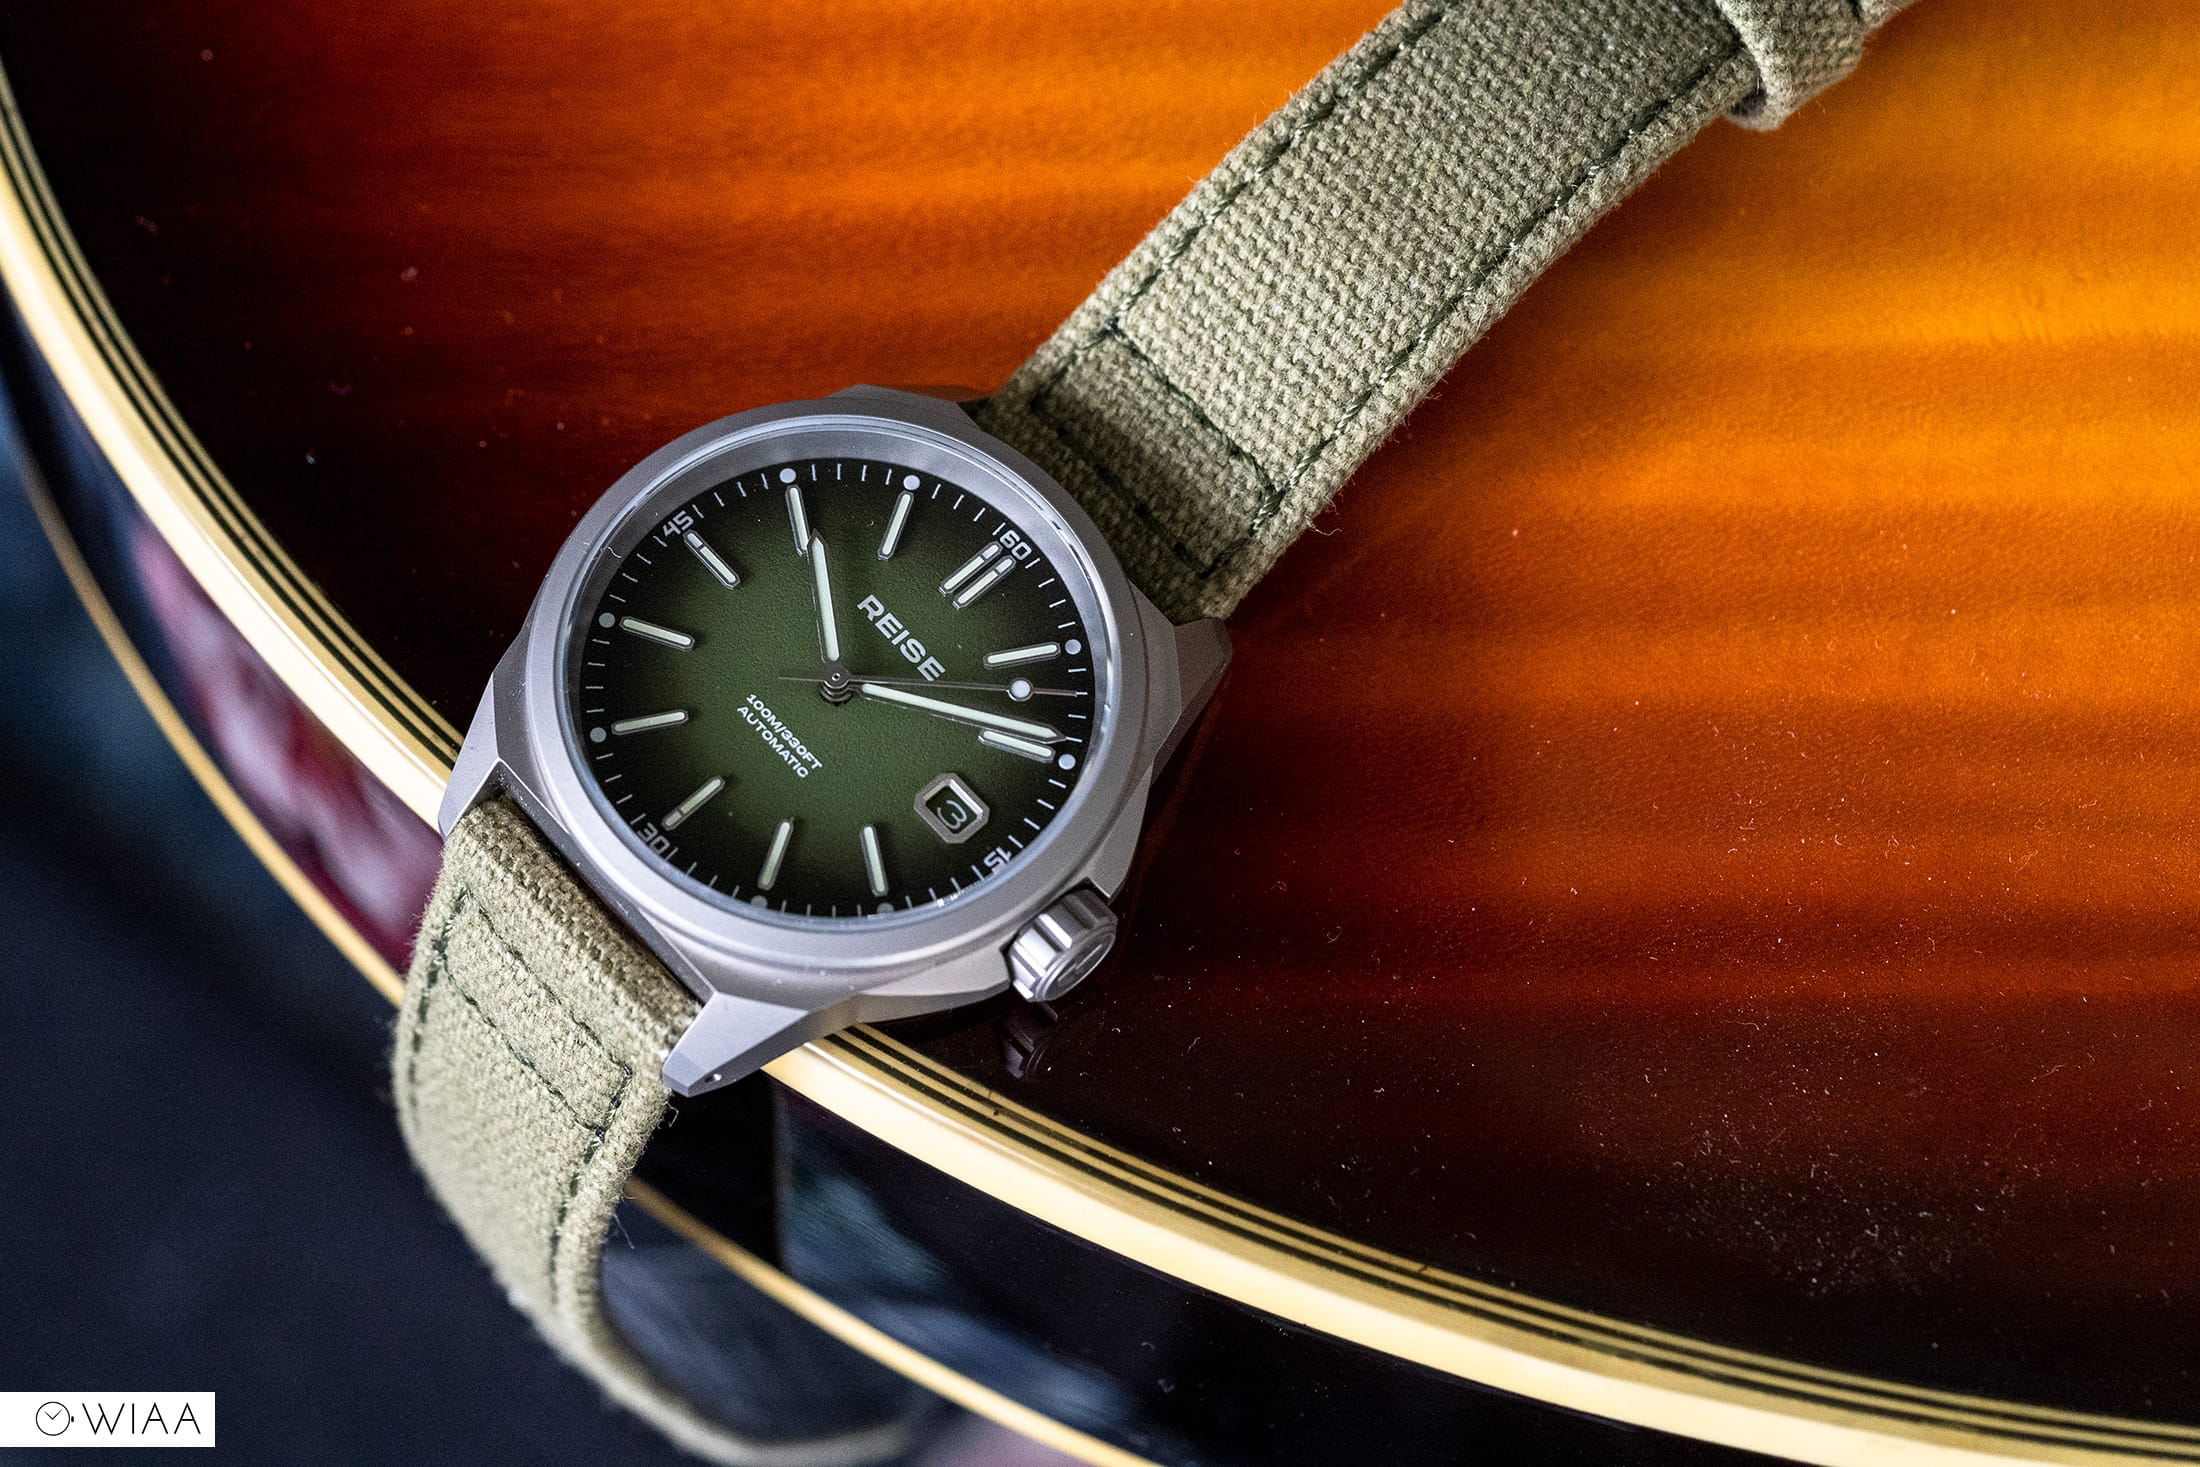 Reise Resolute Camo Green Watch Review